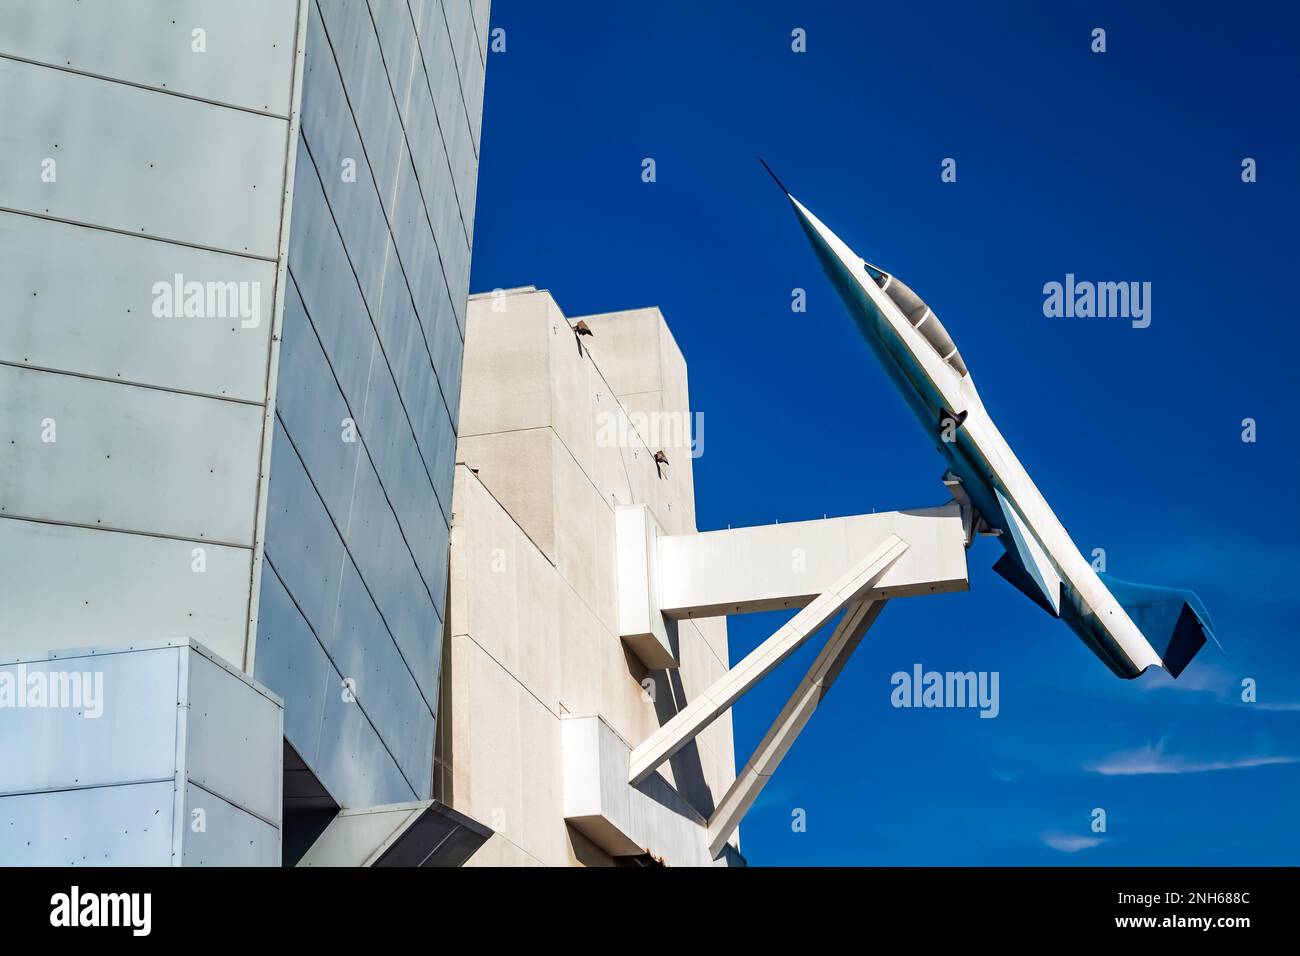 F-104 Starfighter at Exposition Park, Los Angeles Stock Photo